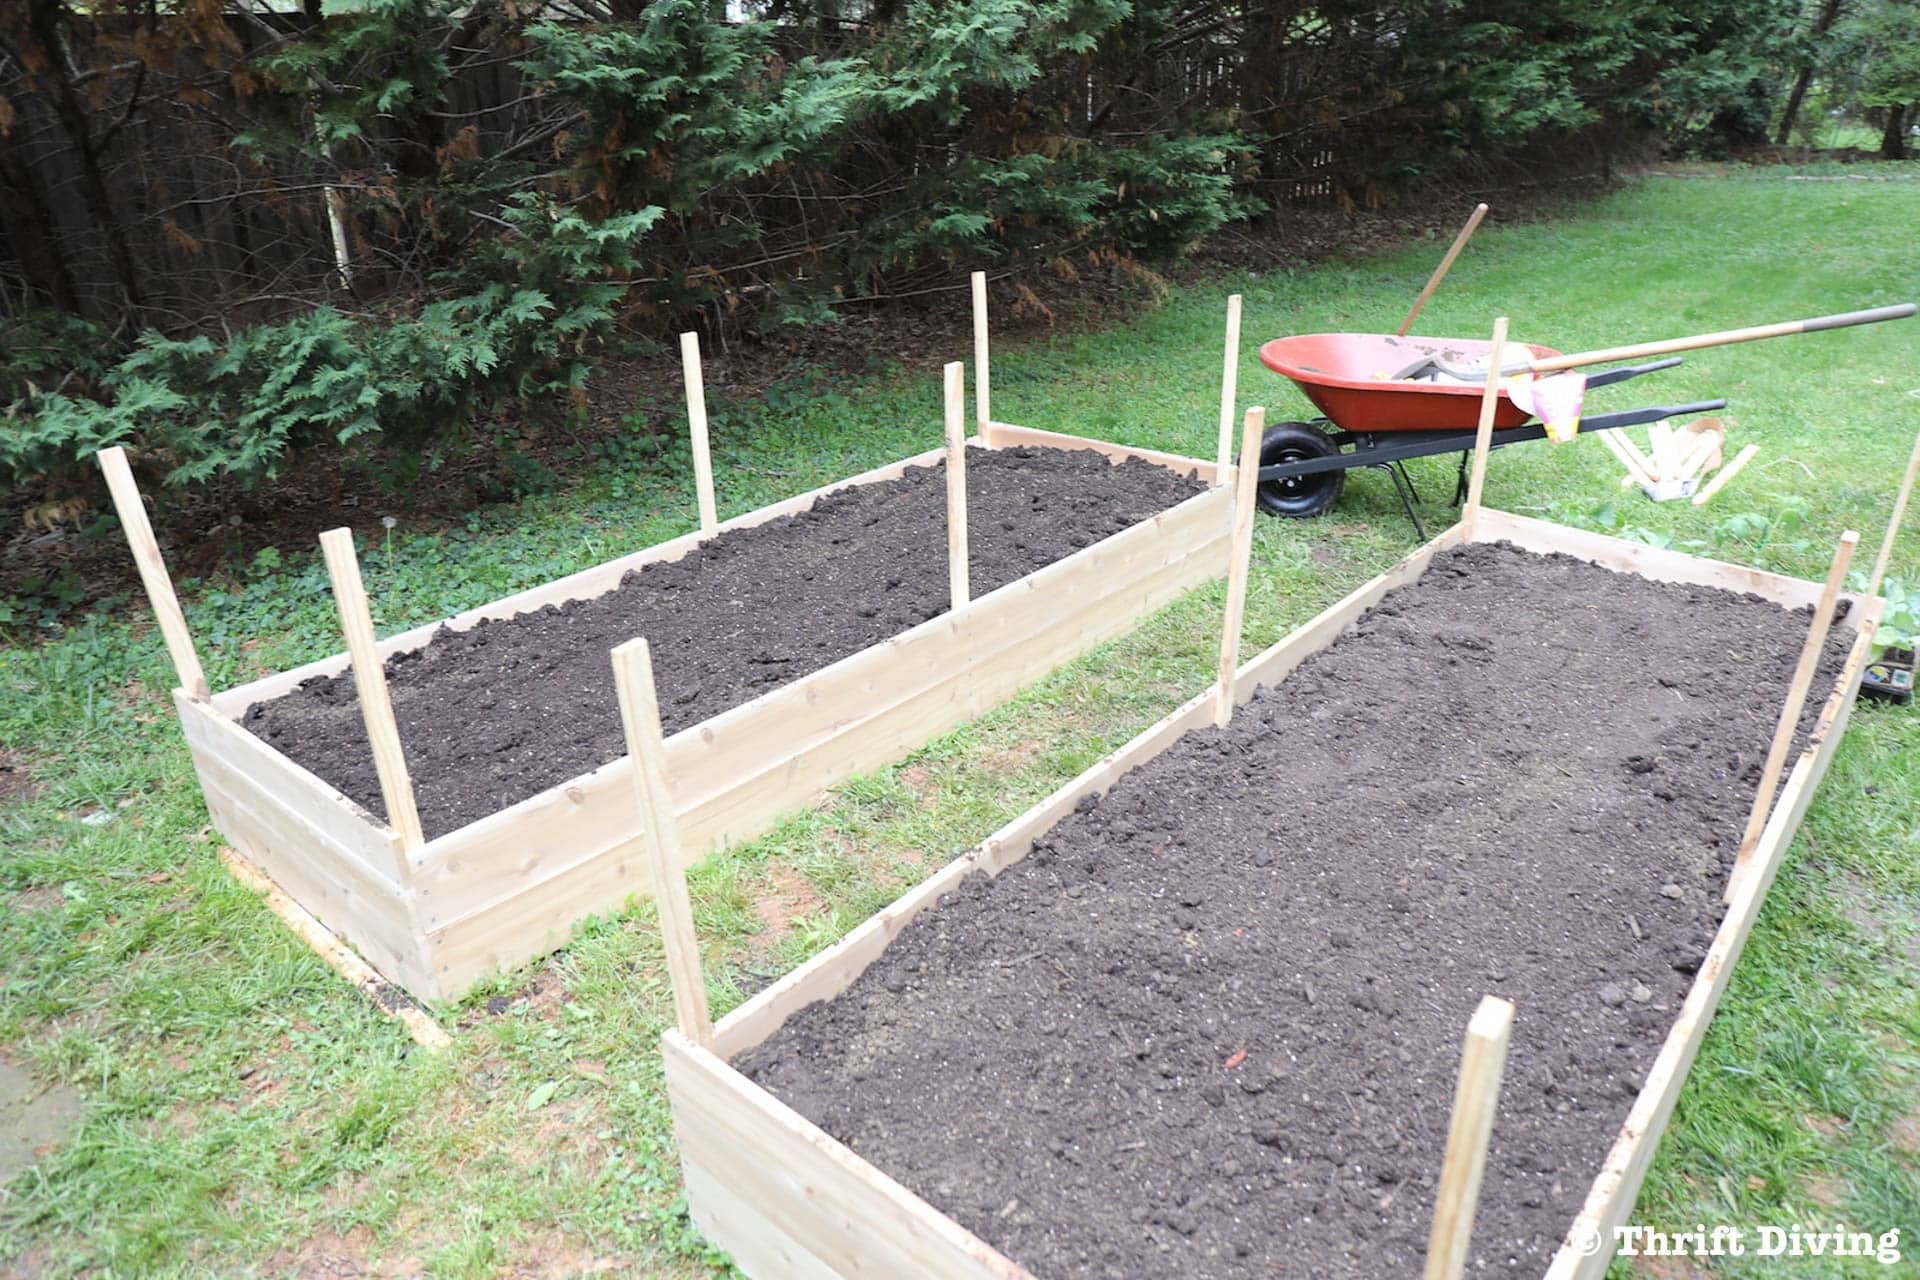 How to Build a Raised Garden Bed Protected With a Metal Fence - How to fill raised garden beds with soil from a nursery. Use delivery. - Thrift Diving